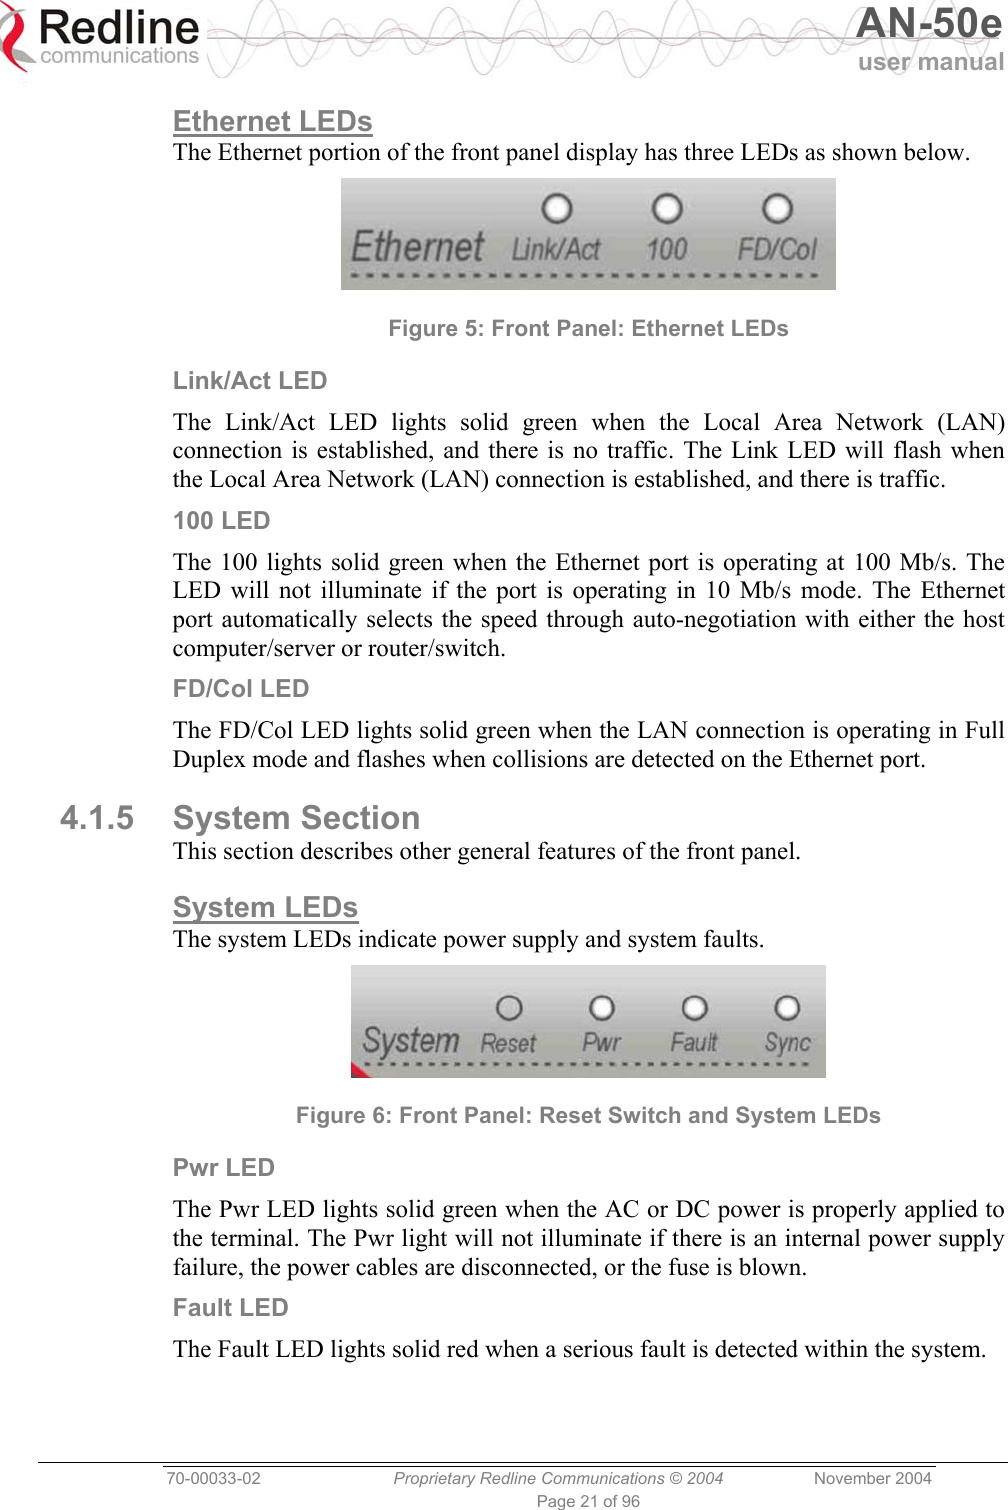   AN-50e user manual  70-00033-02  Proprietary Redline Communications © 2004 November 2004 Page 21 of 96 Ethernet LEDs The Ethernet portion of the front panel display has three LEDs as shown below.  Figure 5: Front Panel: Ethernet LEDs Link/Act LED The Link/Act LED lights solid green when the Local Area Network (LAN) connection is established, and there is no traffic. The Link LED will flash when the Local Area Network (LAN) connection is established, and there is traffic. 100 LED The 100 lights solid green when the Ethernet port is operating at 100 Mb/s. The LED will not illuminate if the port is operating in 10 Mb/s mode. The Ethernet port automatically selects the speed through auto-negotiation with either the host computer/server or router/switch. FD/Col LED The FD/Col LED lights solid green when the LAN connection is operating in Full Duplex mode and flashes when collisions are detected on the Ethernet port. 4.1.5 System Section This section describes other general features of the front panel. System LEDs The system LEDs indicate power supply and system faults.  Figure 6: Front Panel: Reset Switch and System LEDs Pwr LED The Pwr LED lights solid green when the AC or DC power is properly applied to the terminal. The Pwr light will not illuminate if there is an internal power supply failure, the power cables are disconnected, or the fuse is blown. Fault LED The Fault LED lights solid red when a serious fault is detected within the system. 